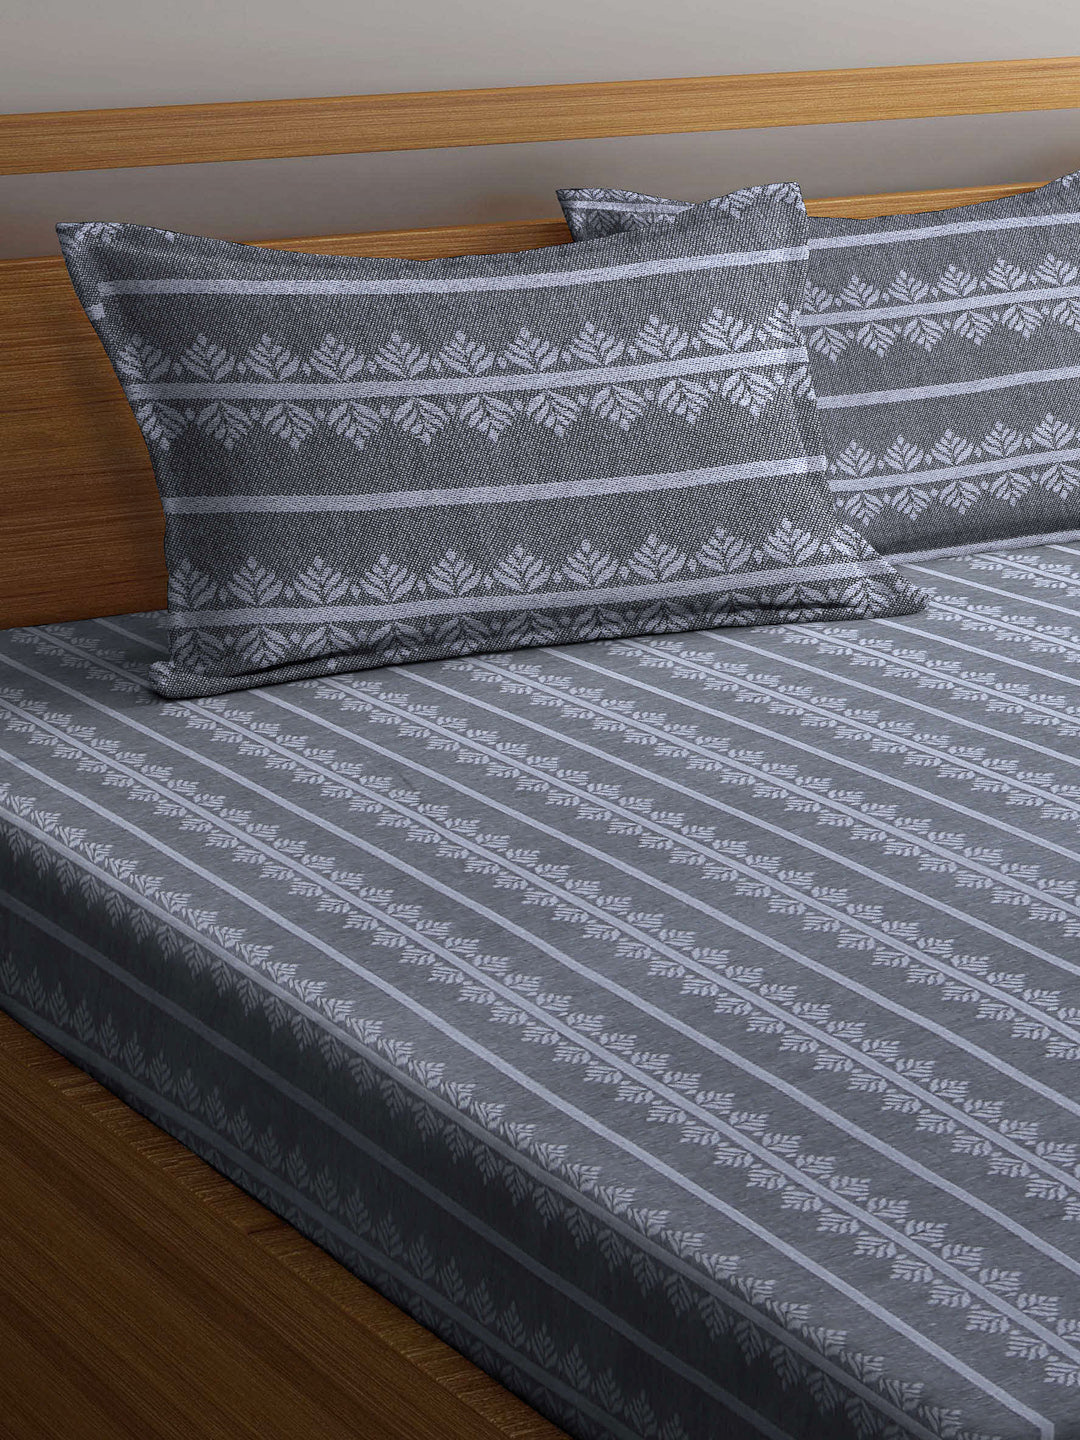 Arrabi Grey Leaf Handwoven Cotton Super King Size Bedsheet with 2 Pillow Covers (270 X 270 cm)